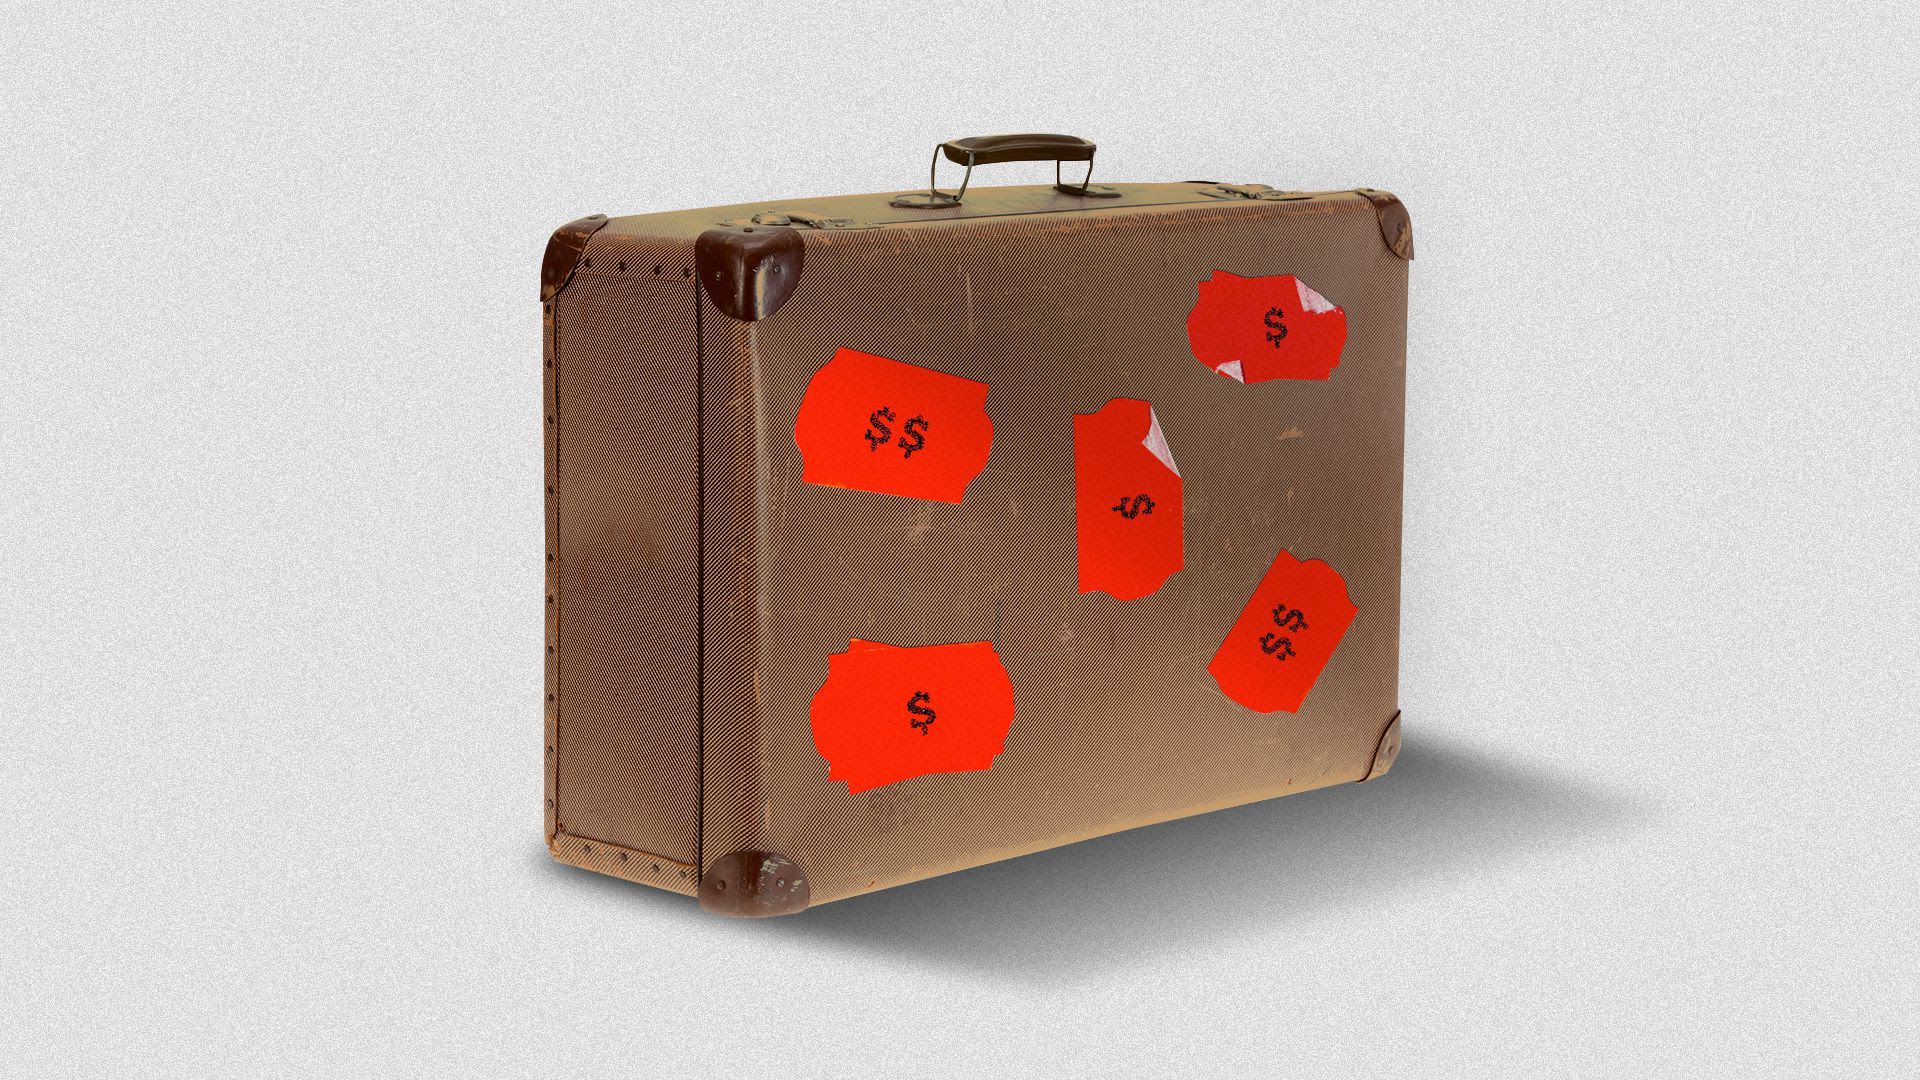 Illustration of suitcase with discount stickers on it